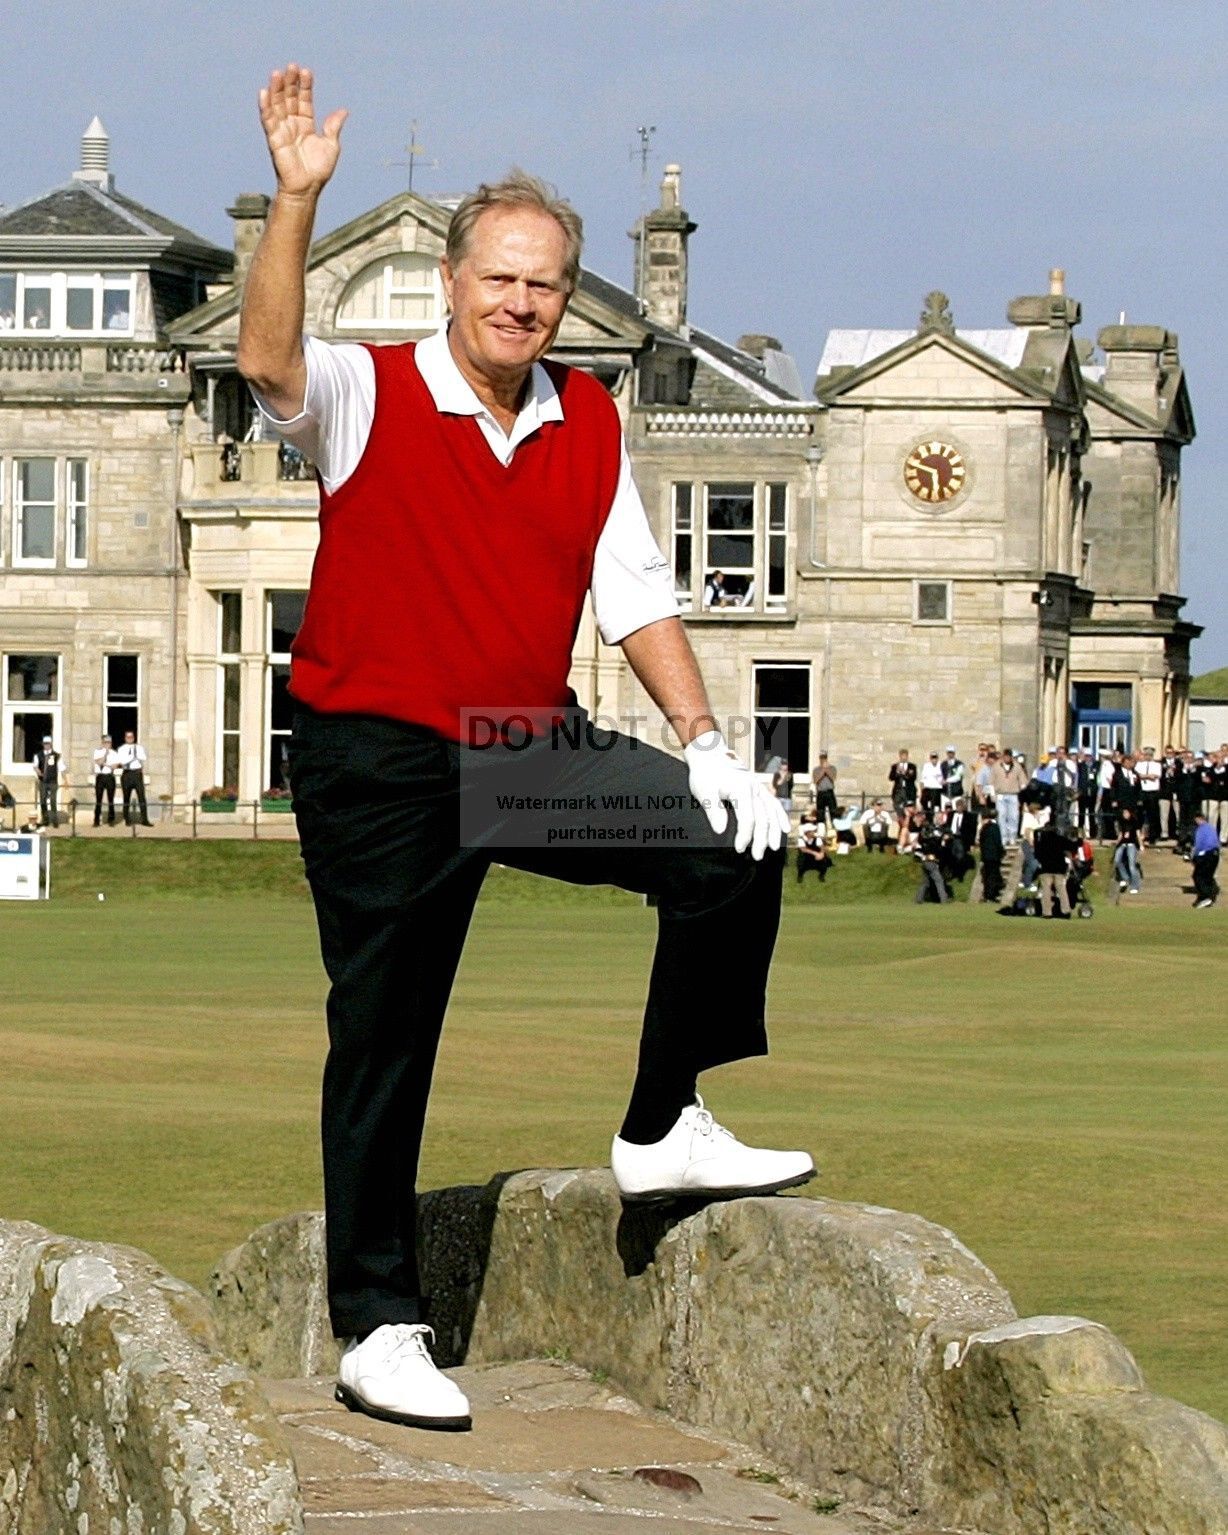 JACK NICKLAUS WAVES FAREWELL DURING 2005 BRITISH OPEN  8X10 SPORTS PHOTO (CC843)